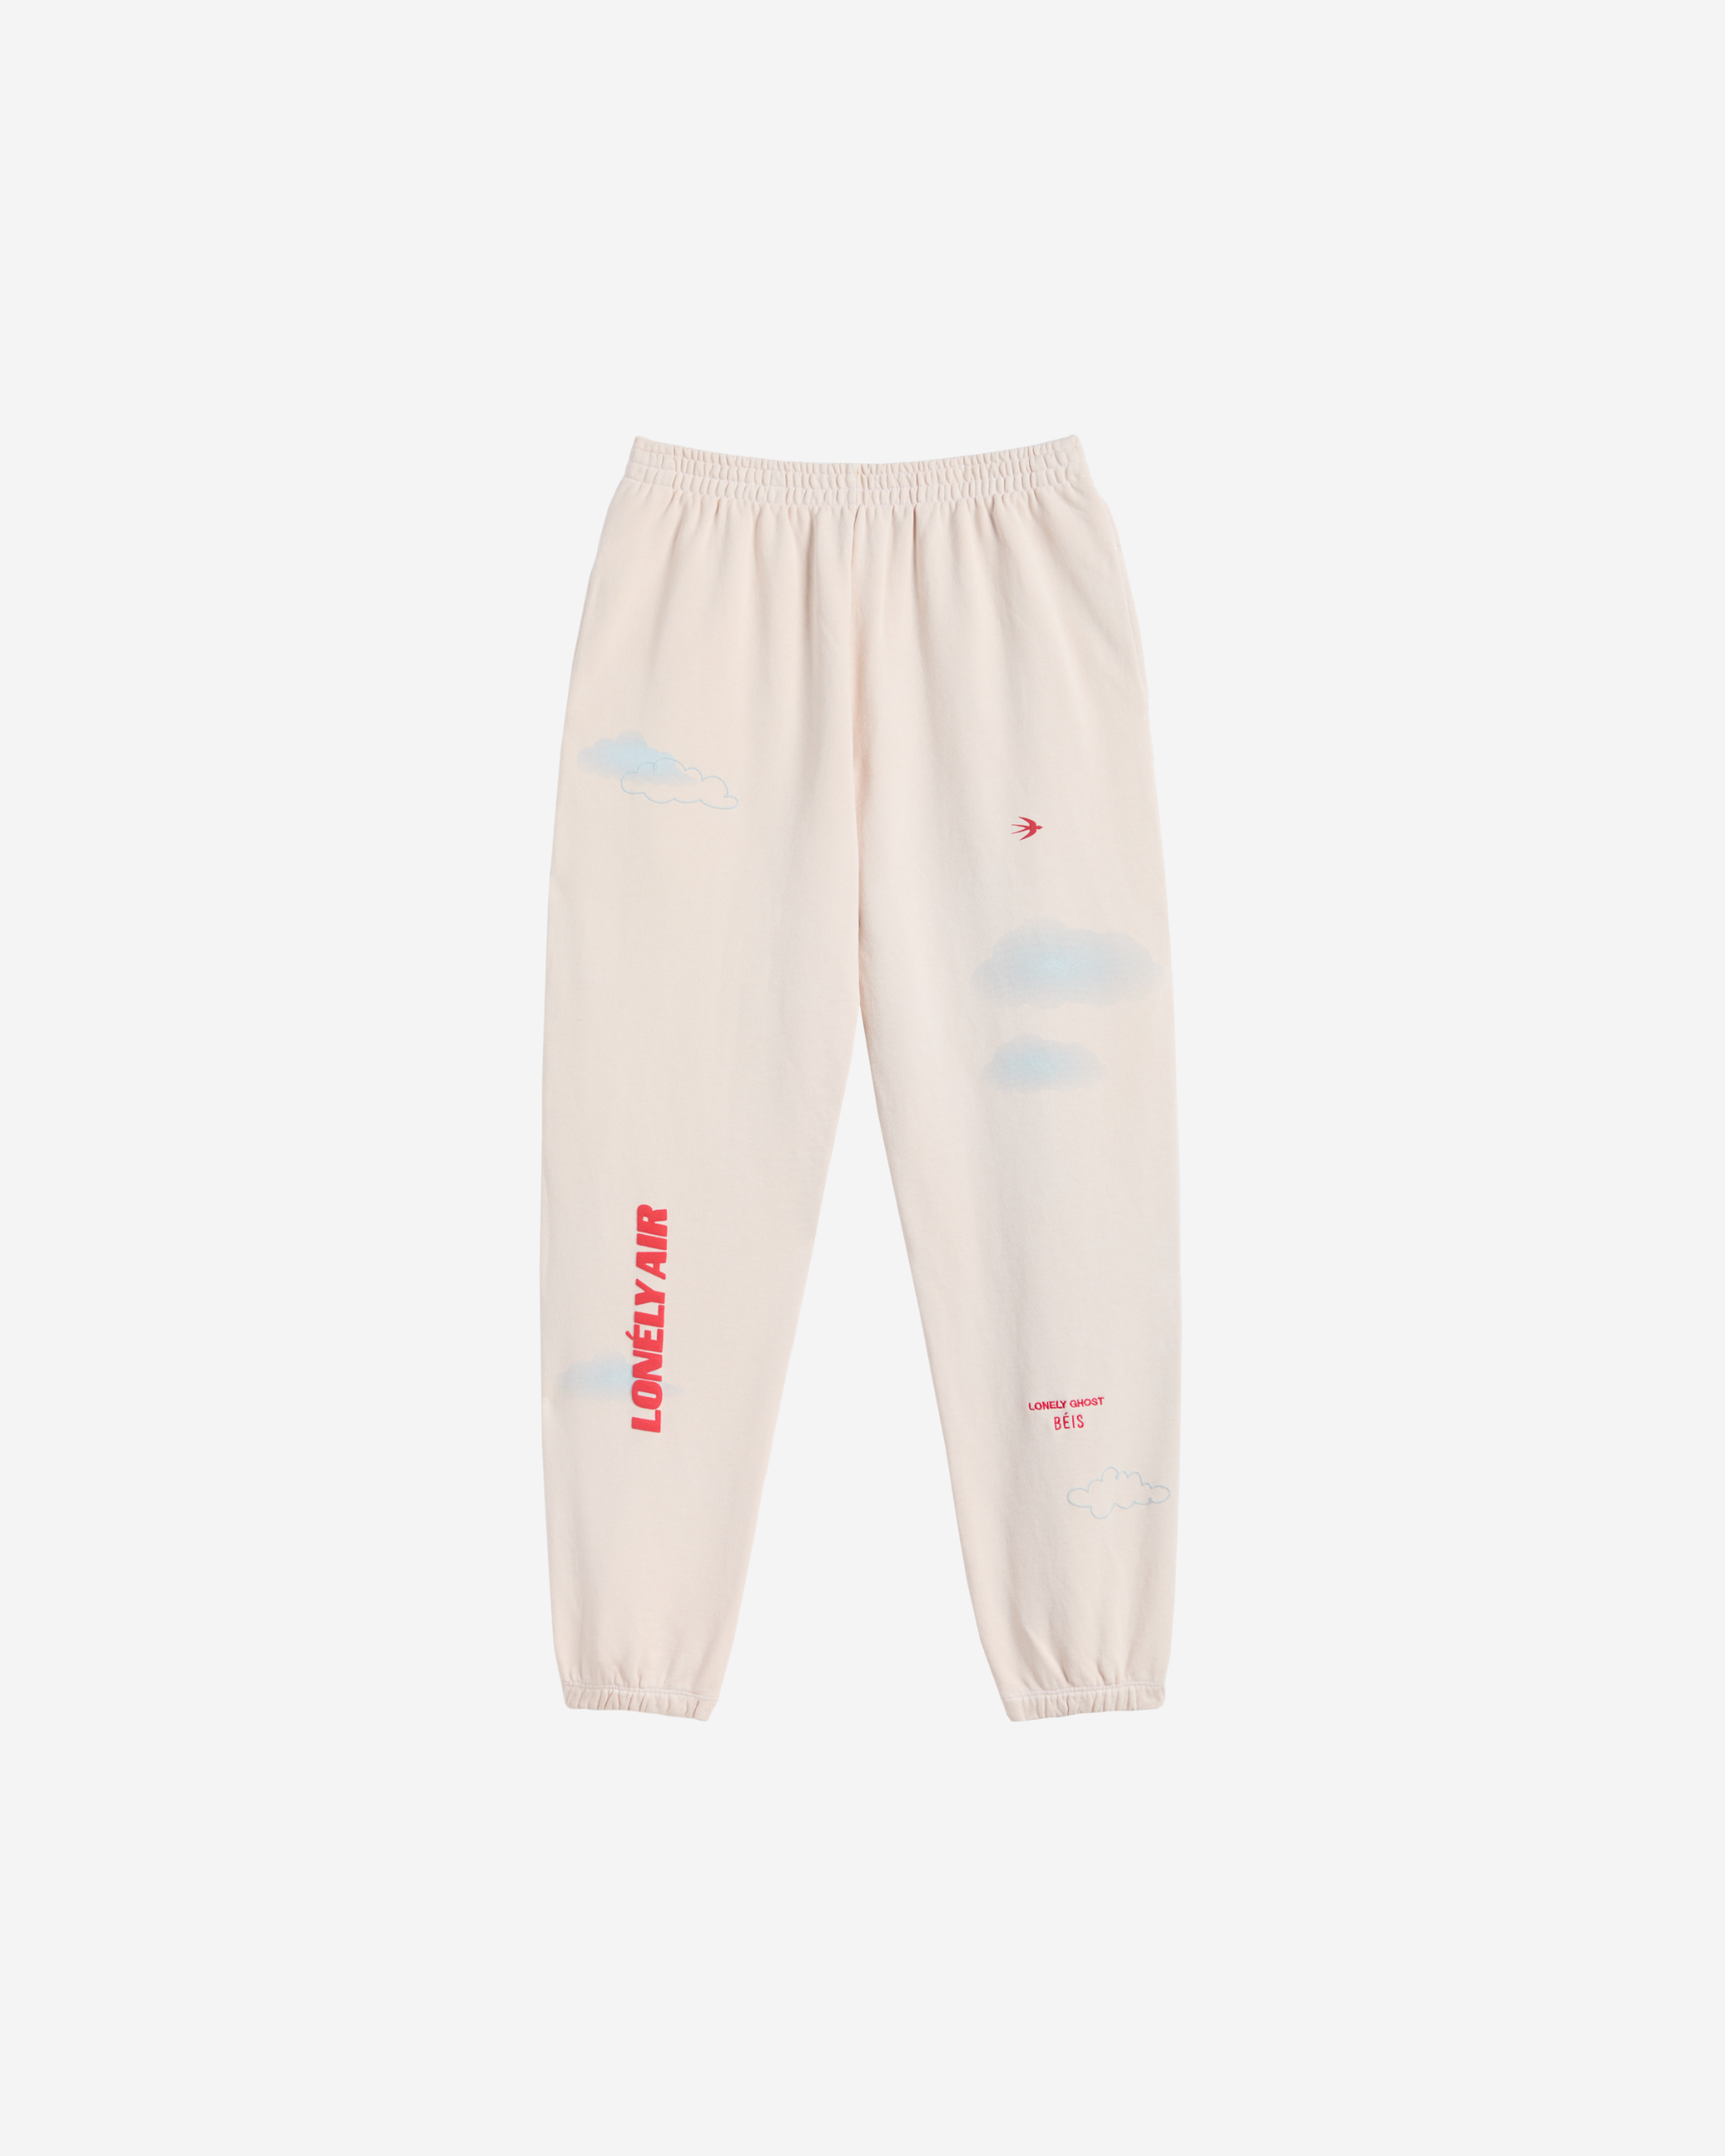 LG x BÉIS Life in the Clouds Heavyweight Sweatpants